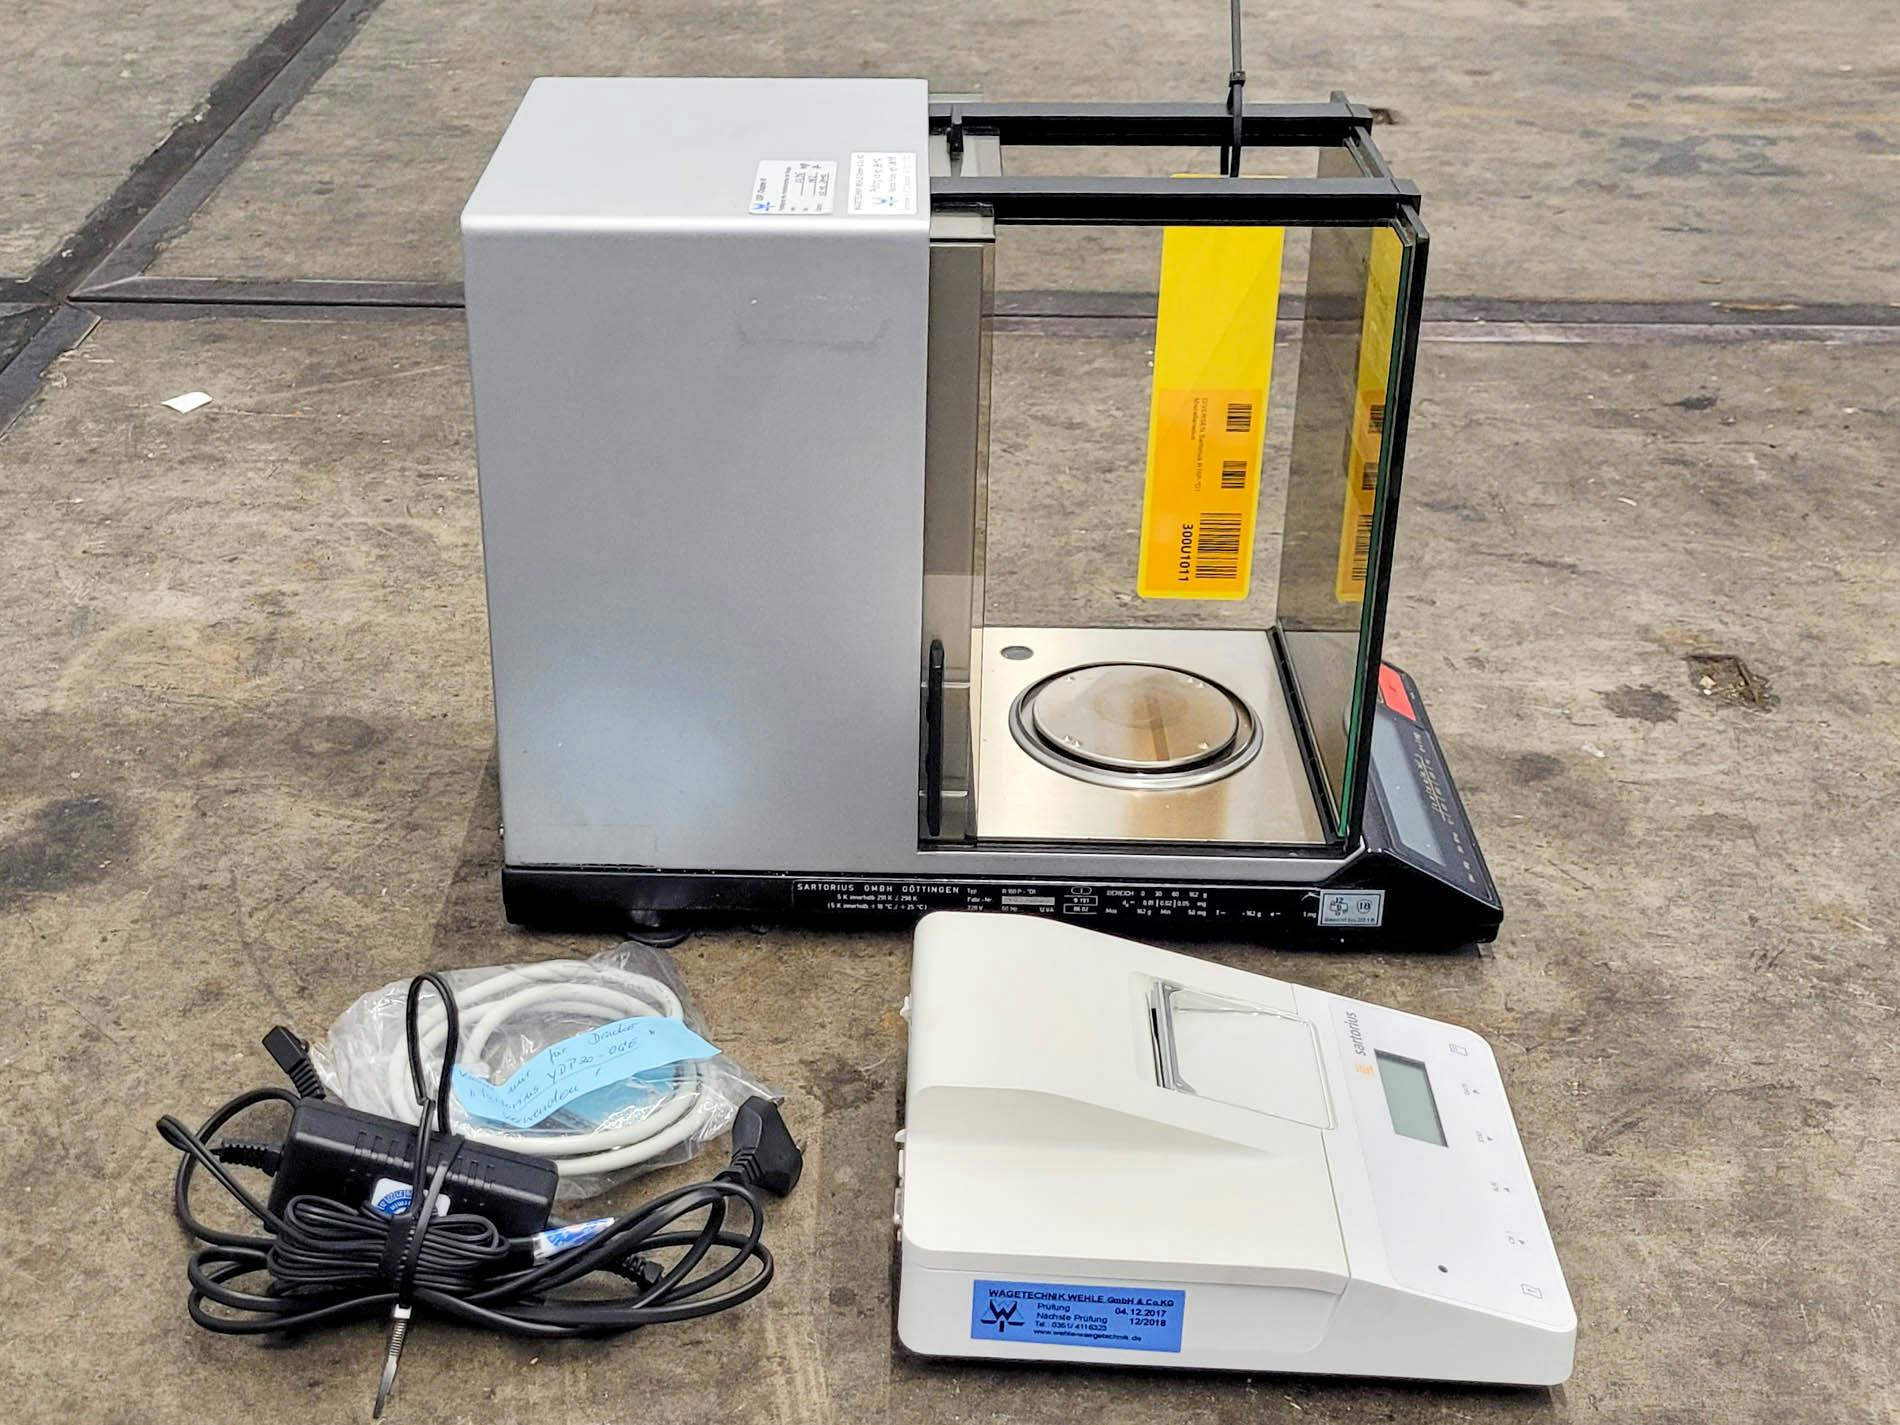 Sartorius R160P-*D1 "weighing scale" - Miscellaneous - image 5